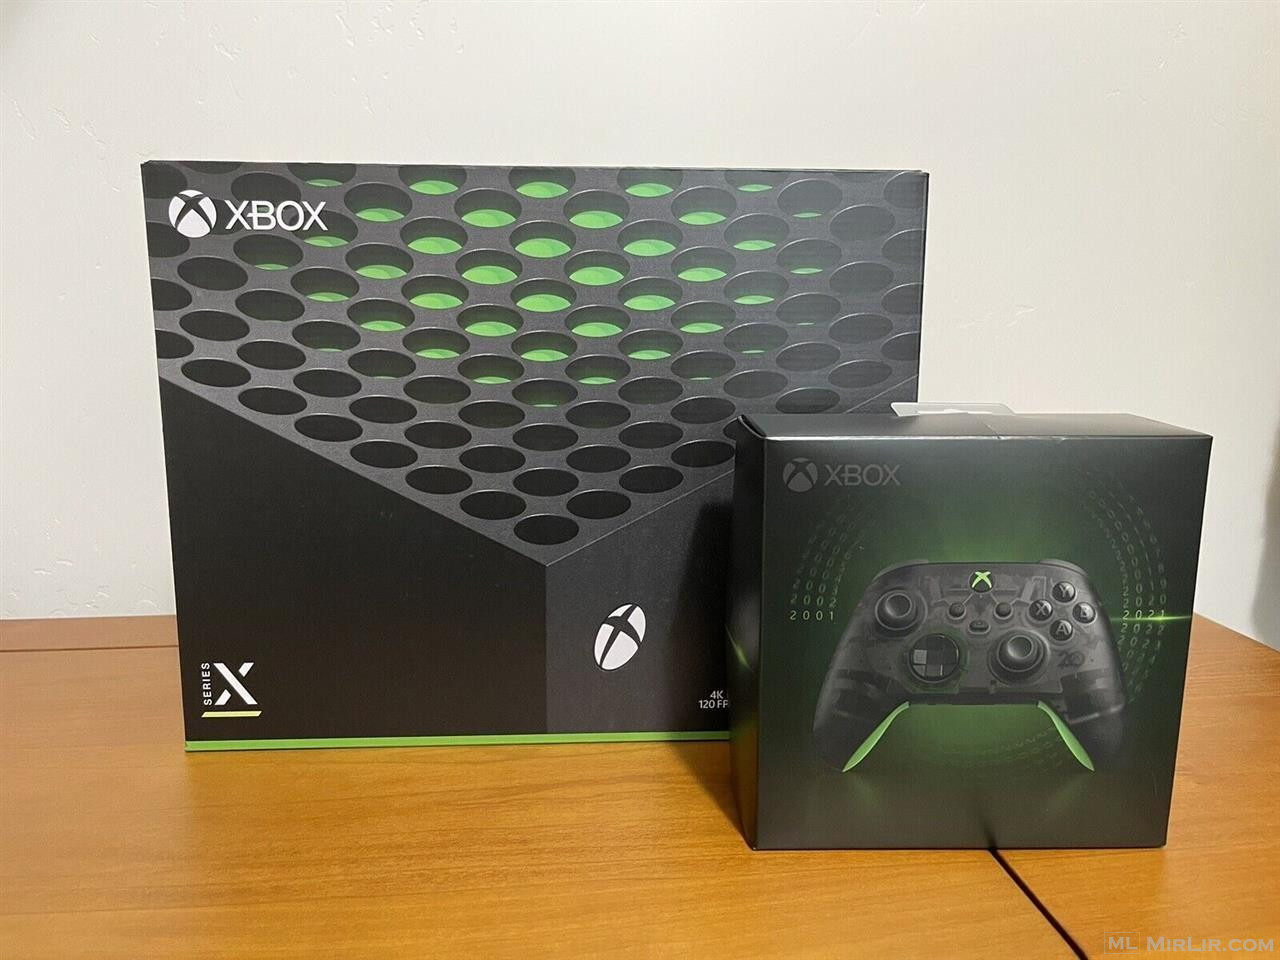 Microsofts Xbox Series X console 1TB + 2 ControllerS 5 Games